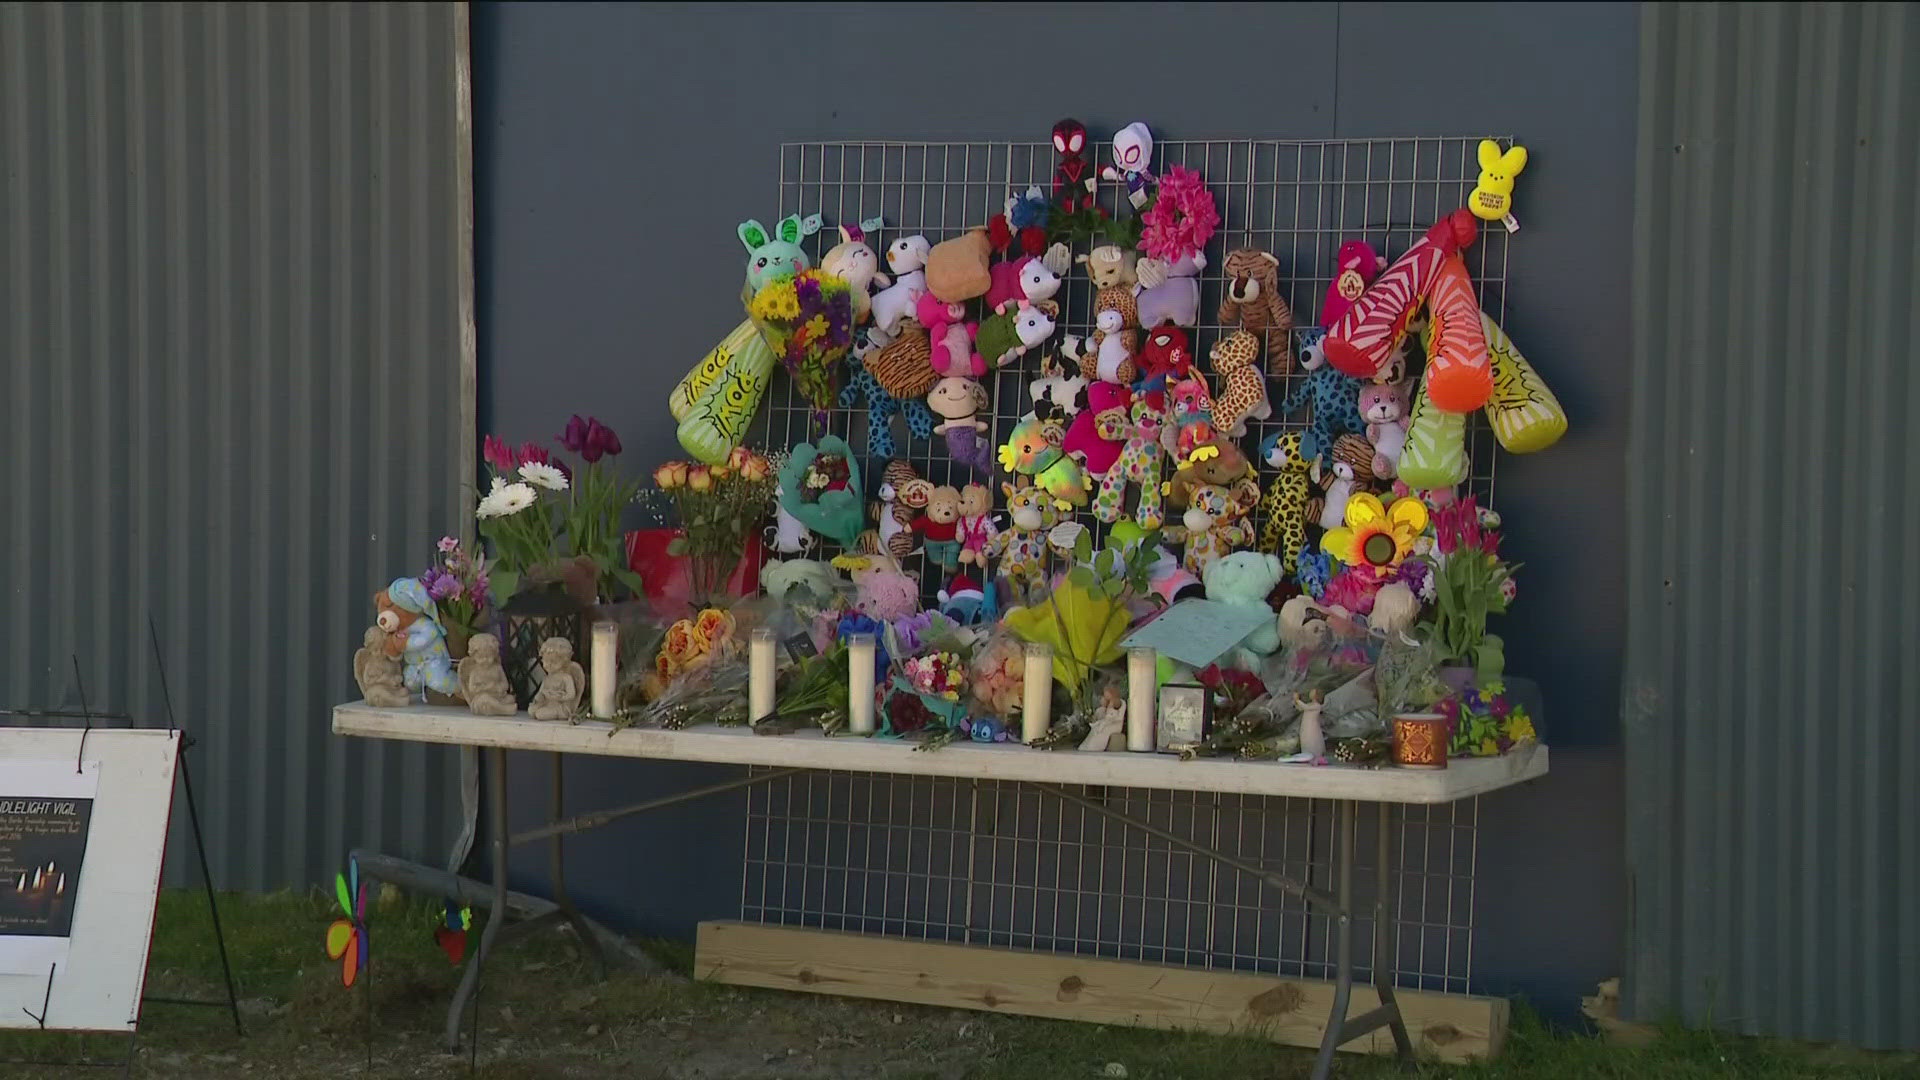 Monroe County residents say the tragedy is still hurtful for the community. The grief is felt by people all across the country, too.